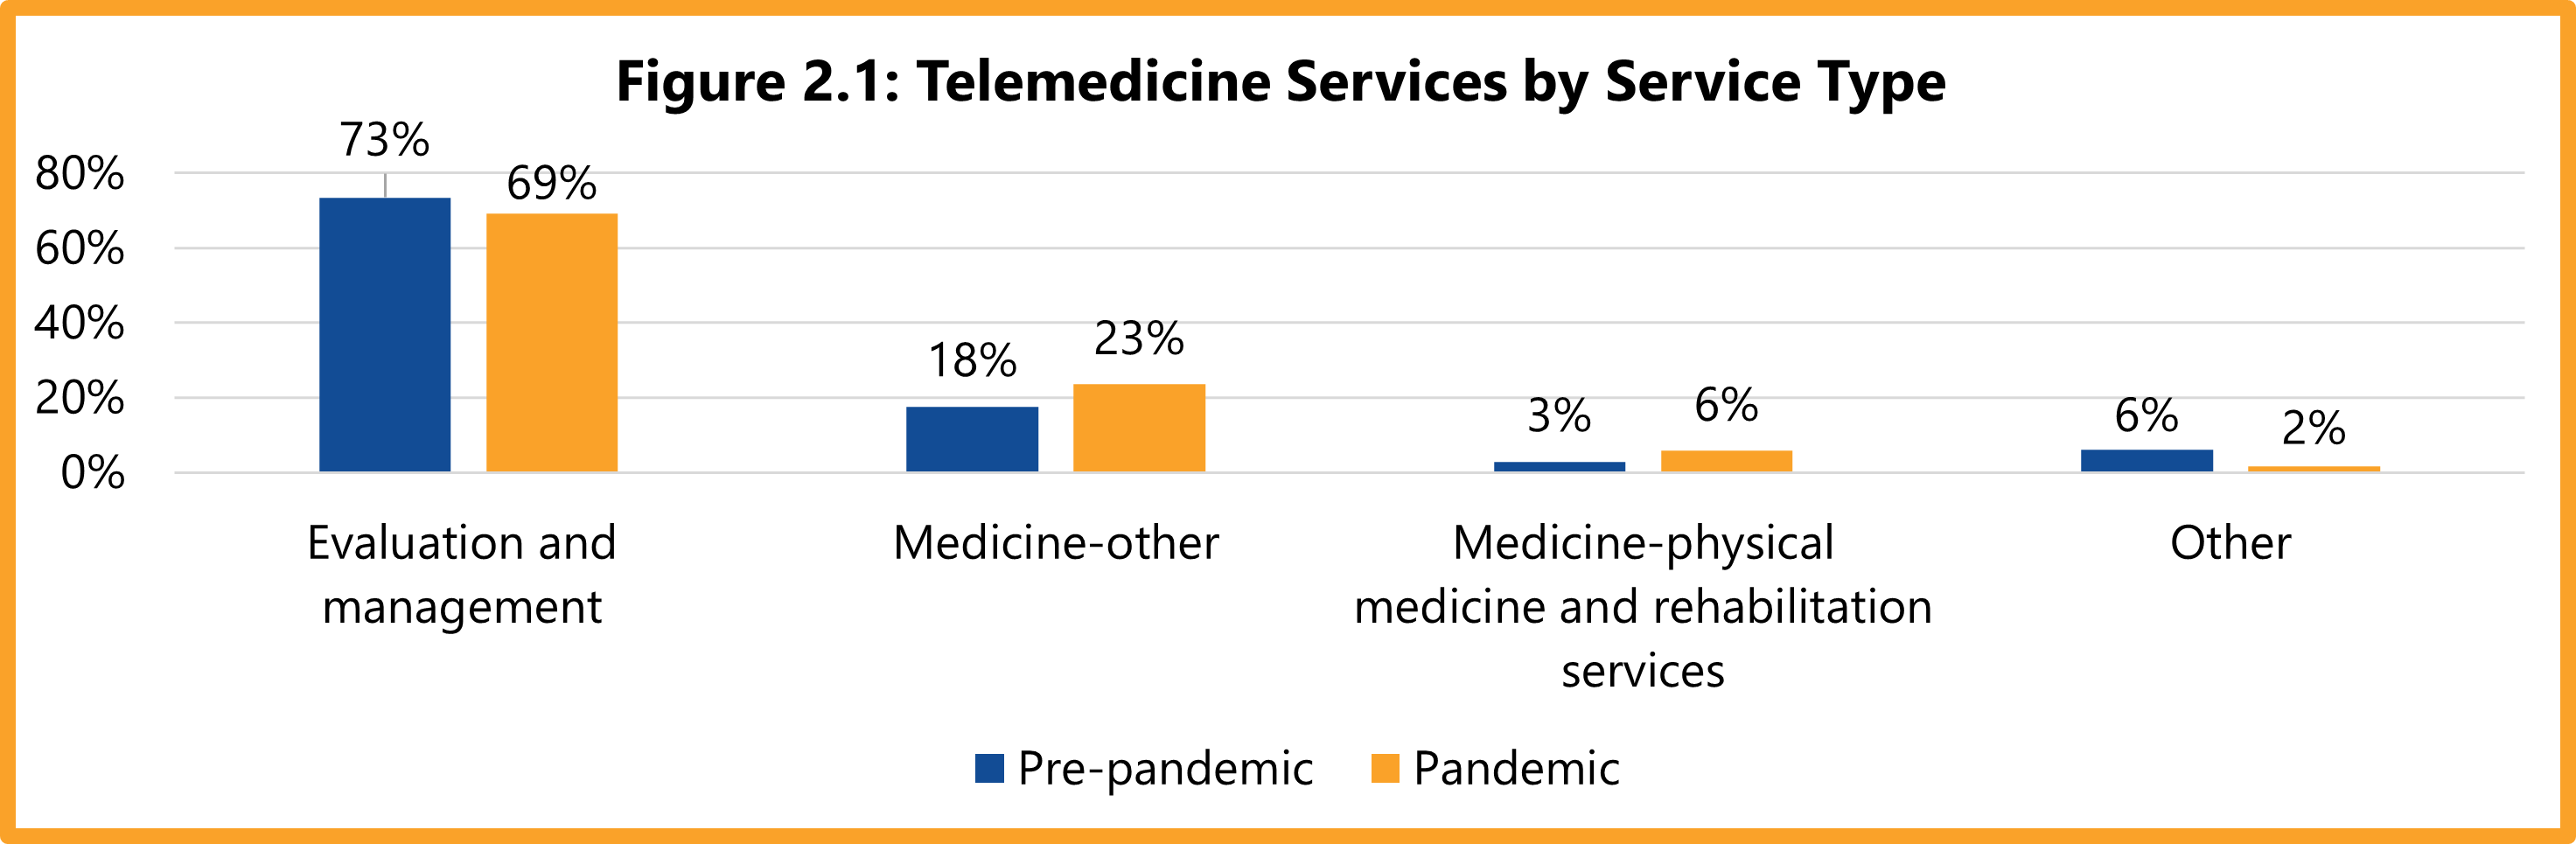 Telemedicine services by service type, pre-pandemic, and pandemic. Evaluation and management - 3% pre, 69% pandemic. Medicine-other – 18% pre, 23% pandemic. Medicine-physical medicine and rehabilitation services – 3% pre, 6% pandemic. Other – 6% pre, 2% pandemic.